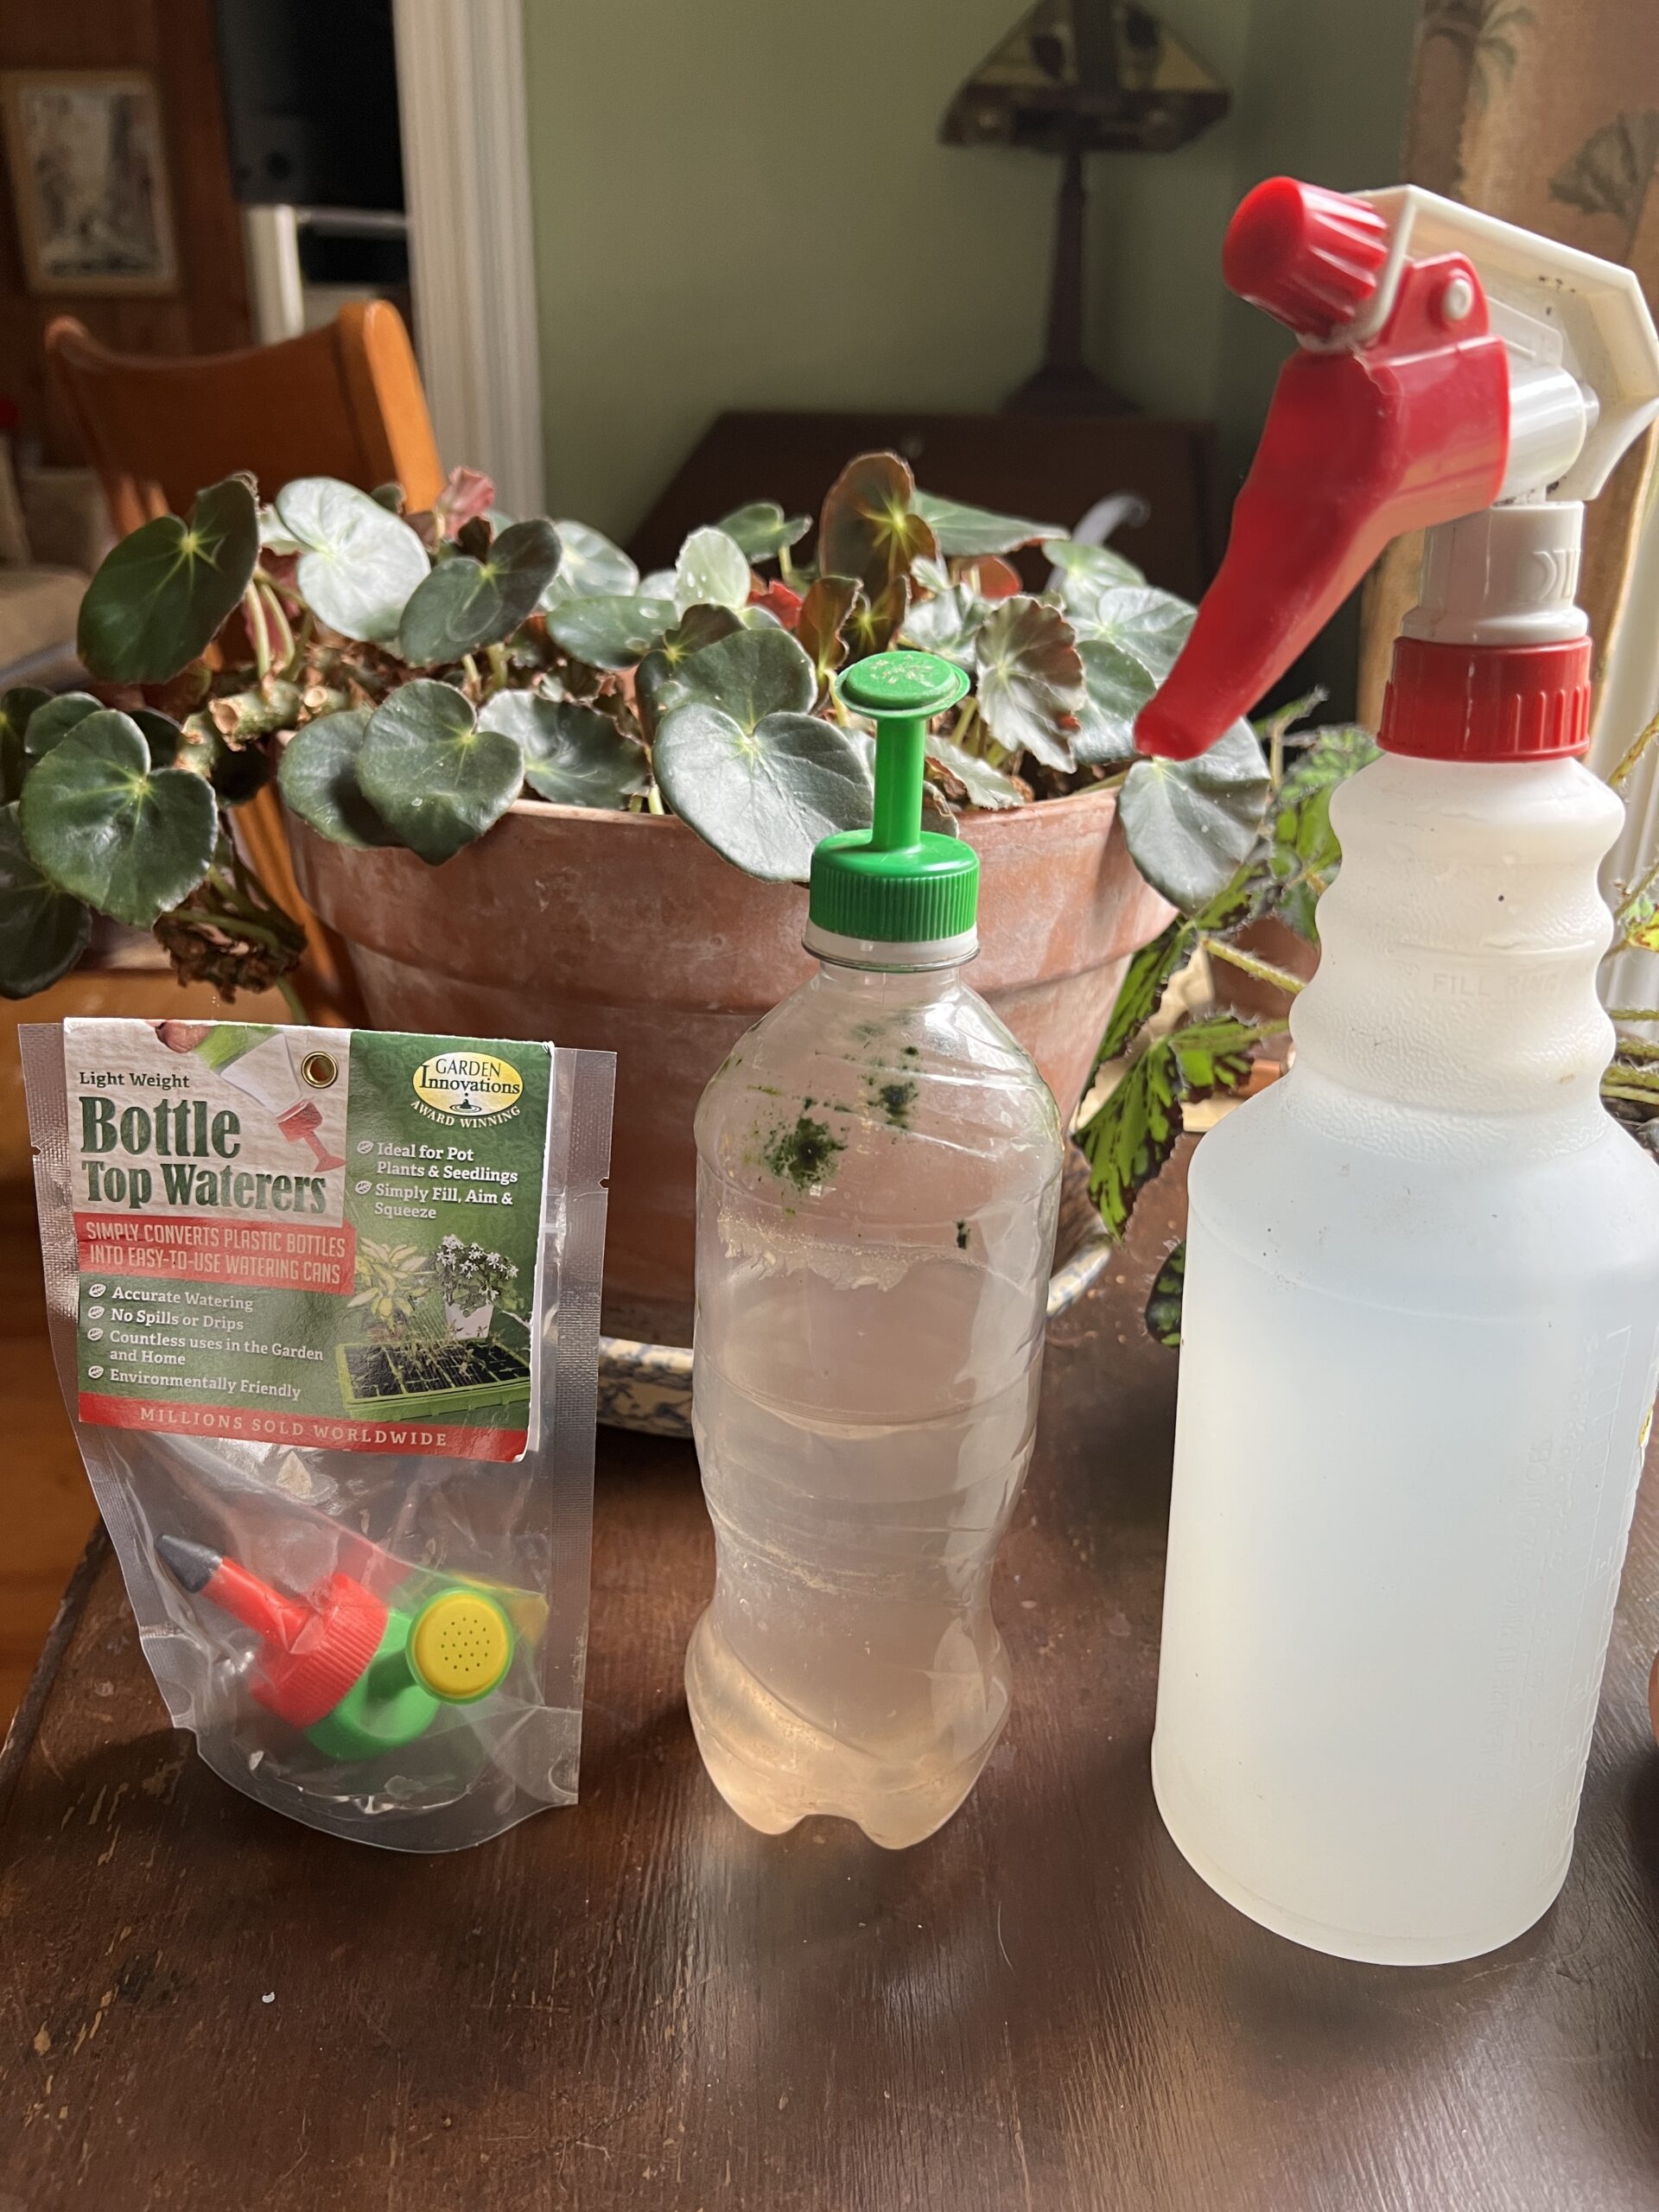 Once seeds are sown in a flat or pot, how do you water them? The best and maybe the safest ways are with an inexpensive spray bottle with an adjustable nozzle (right) or bottle-top waterers as seen on the left and atop a plastic water bottle in the center.
ANDREW MESSINGER